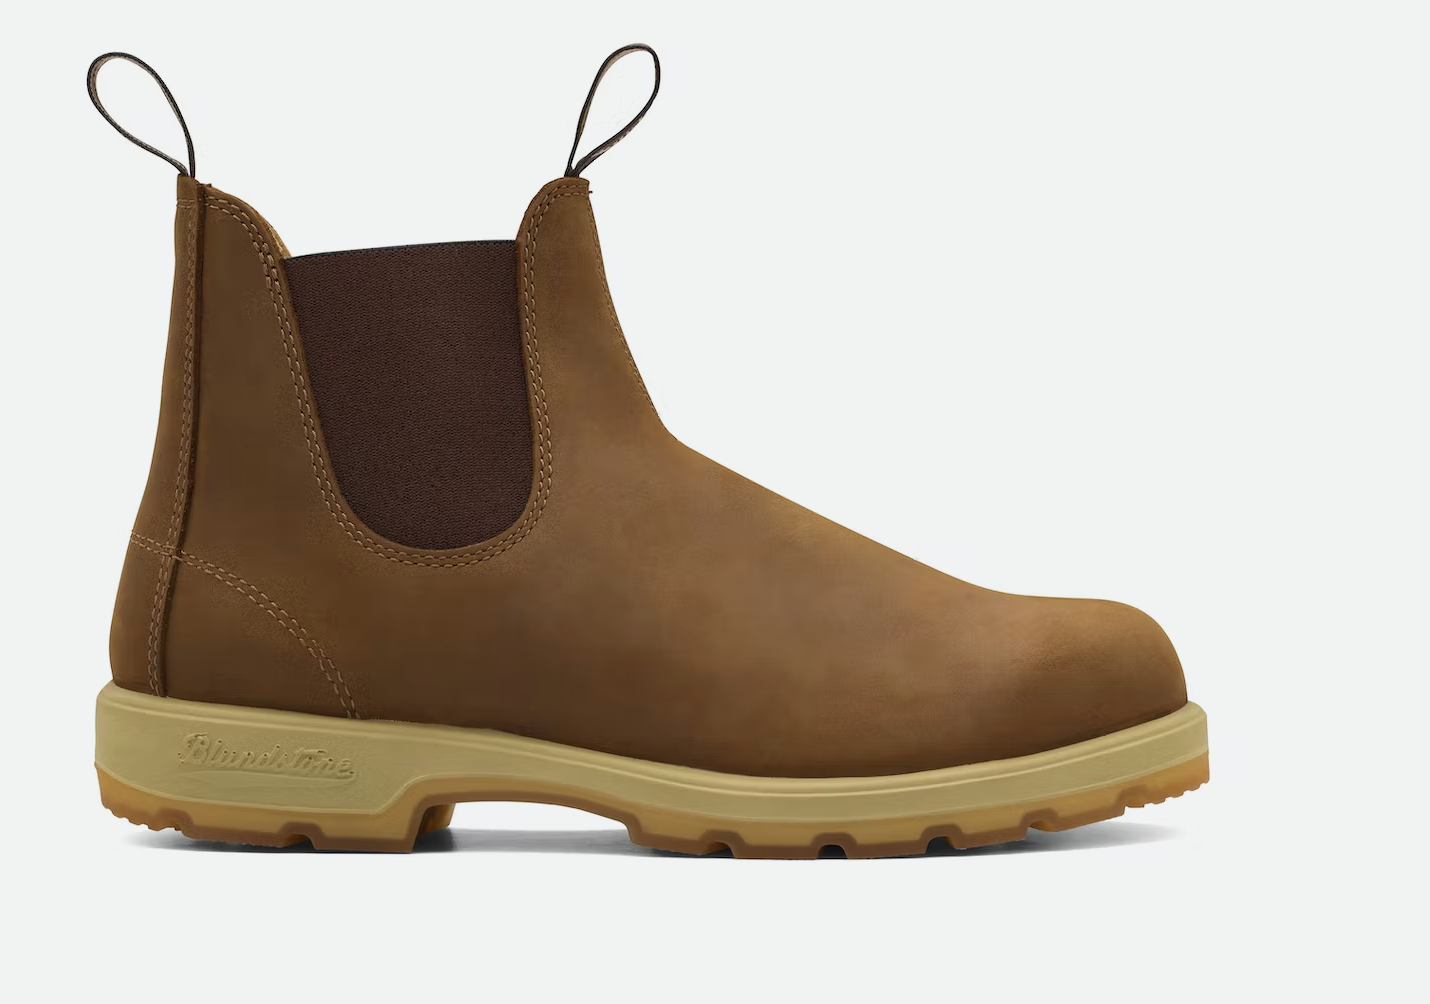 Christmas Gift Guide 2022 I The Minimalist - Blundstone #1320 Chelsea Boot